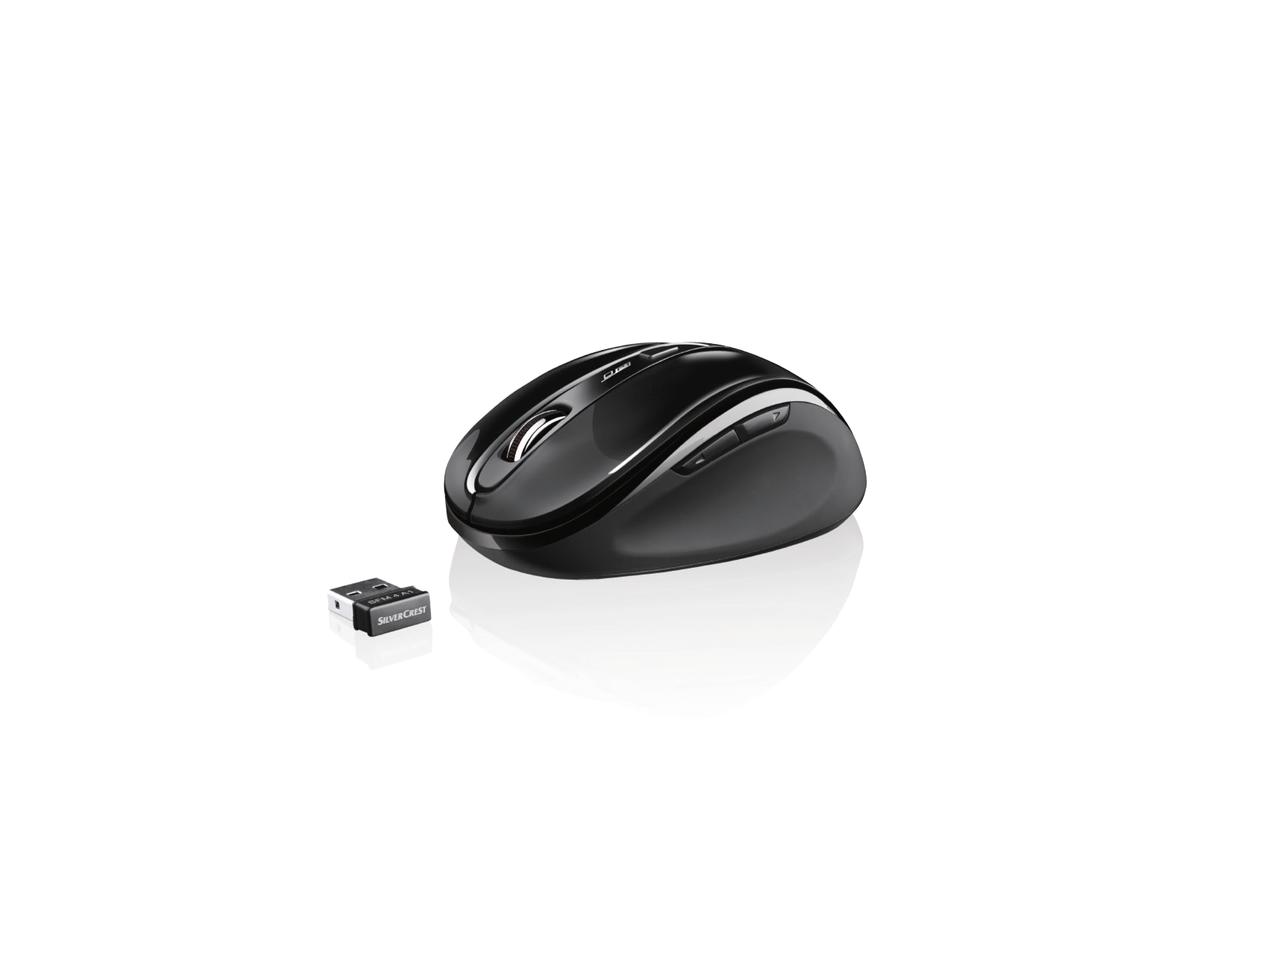 SILVERCREST Wireless Optical Mouse